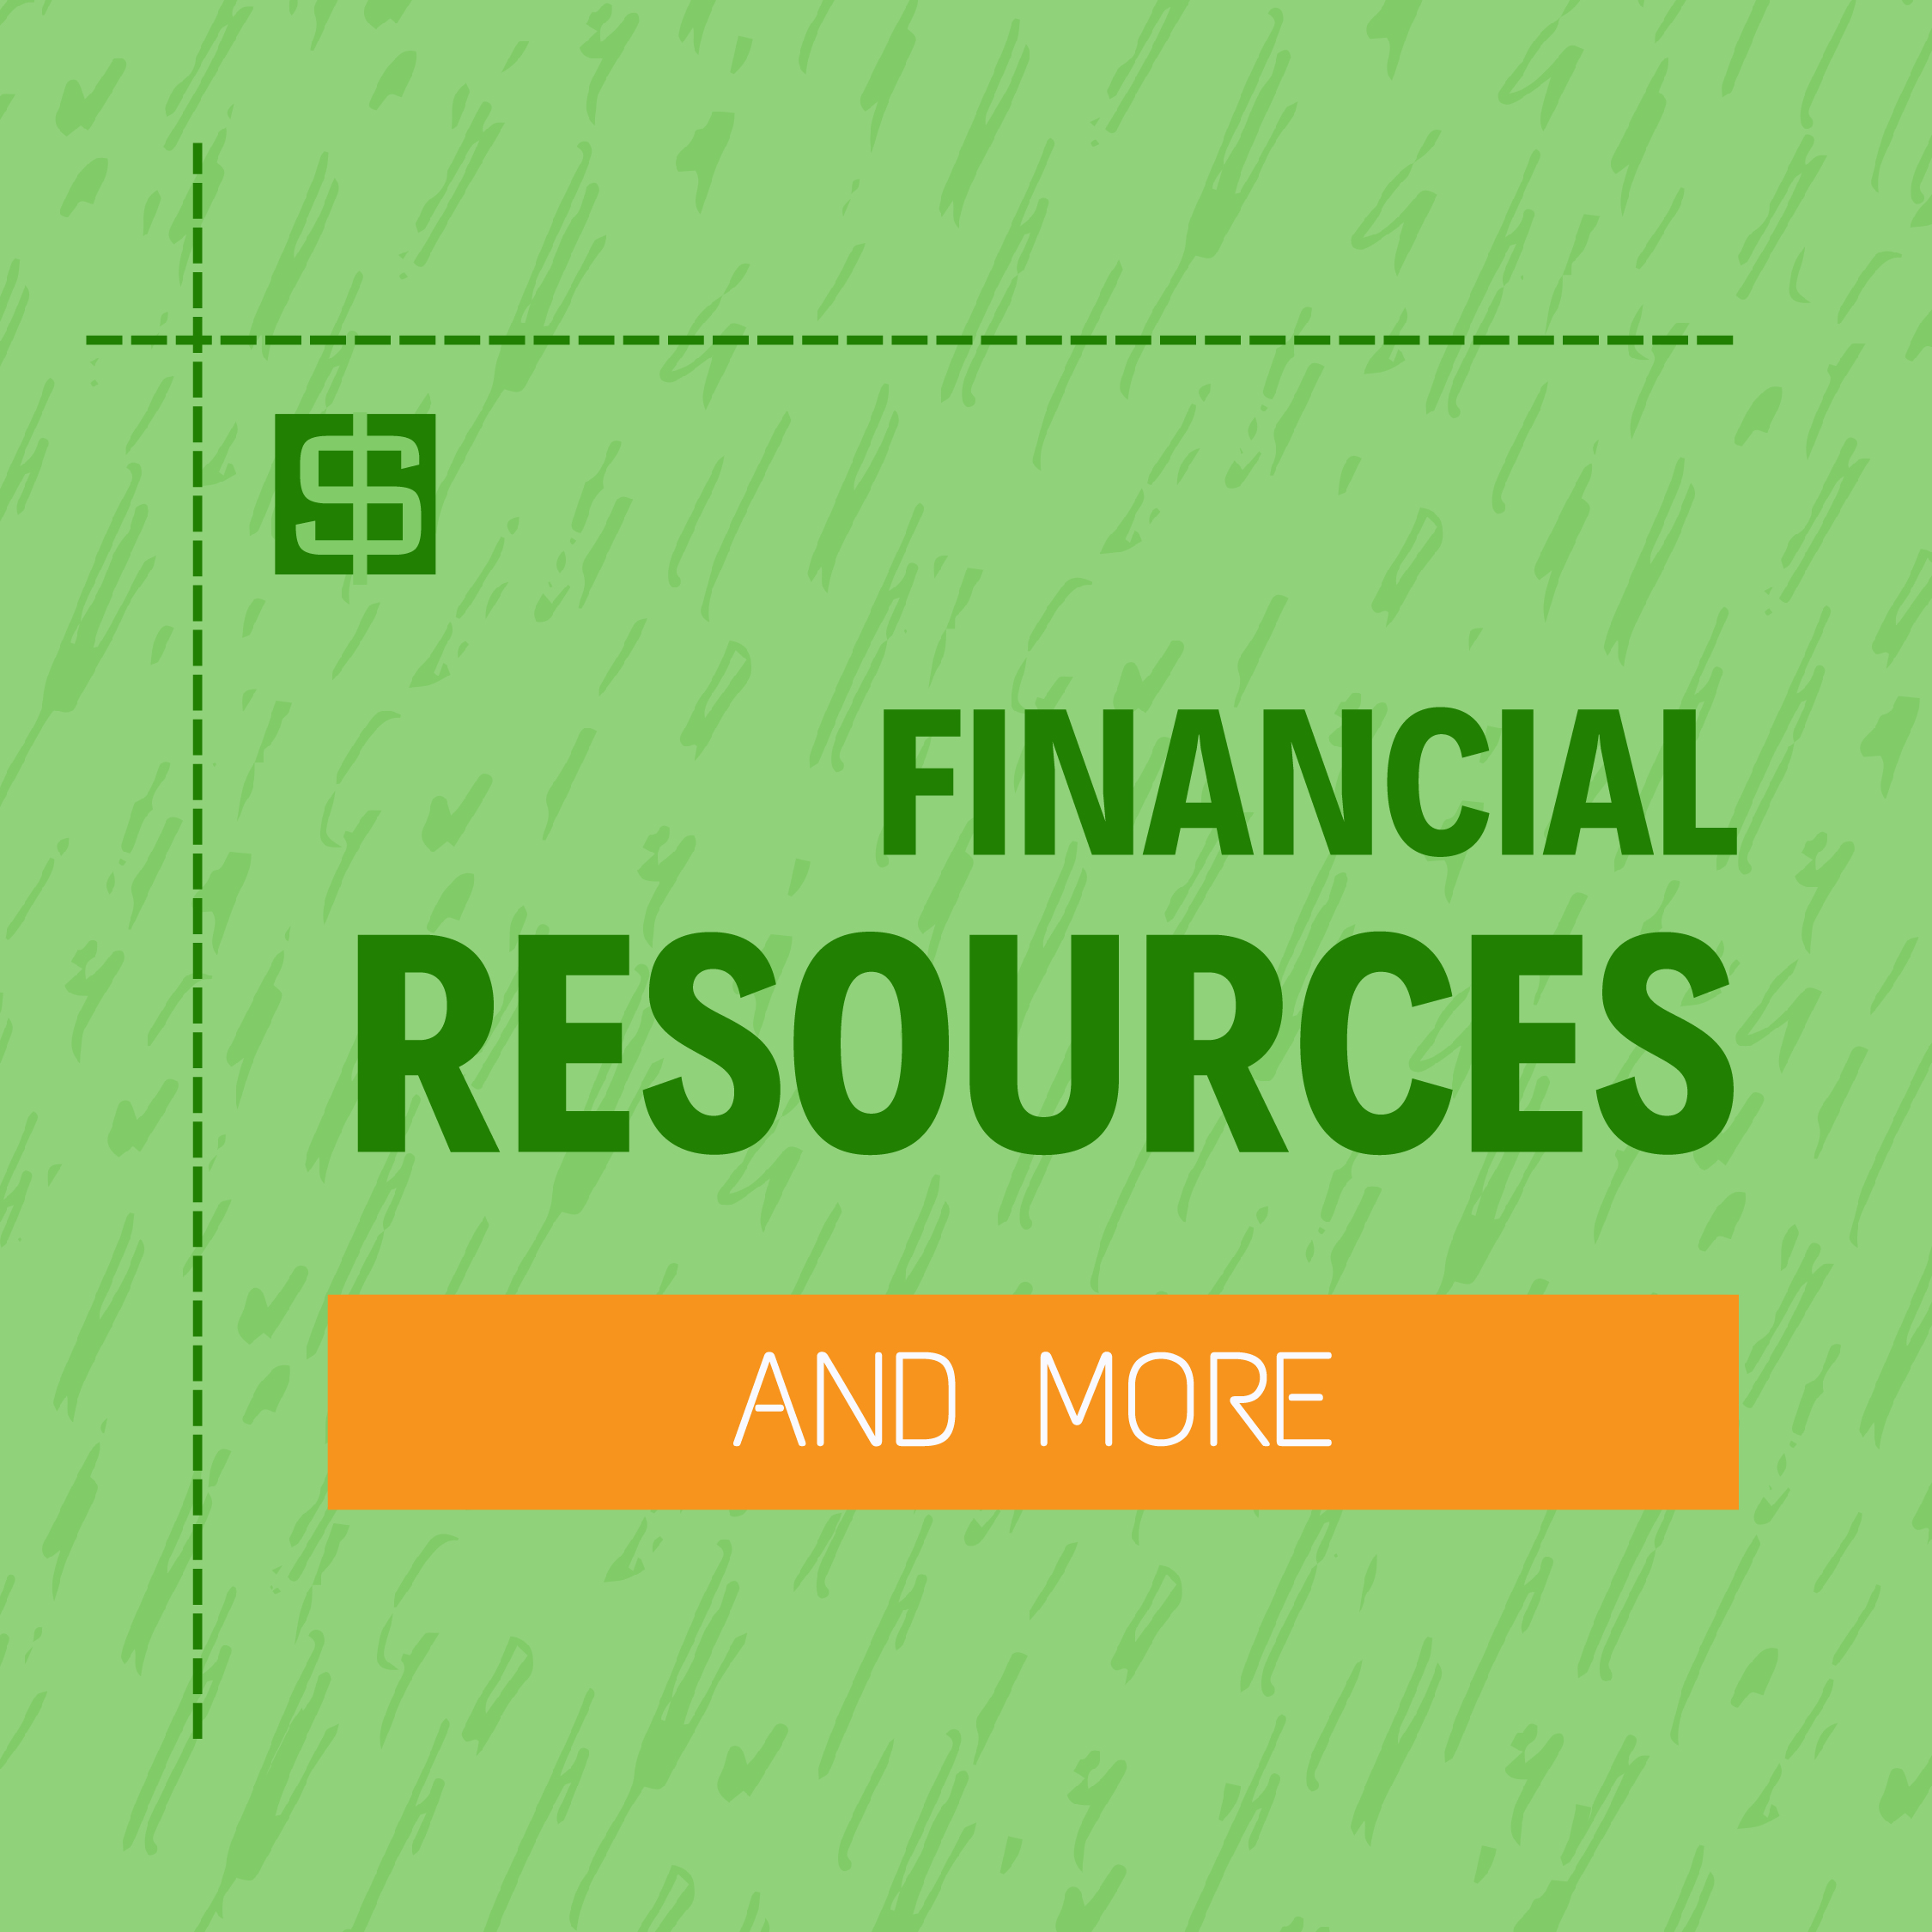 Financial Resources